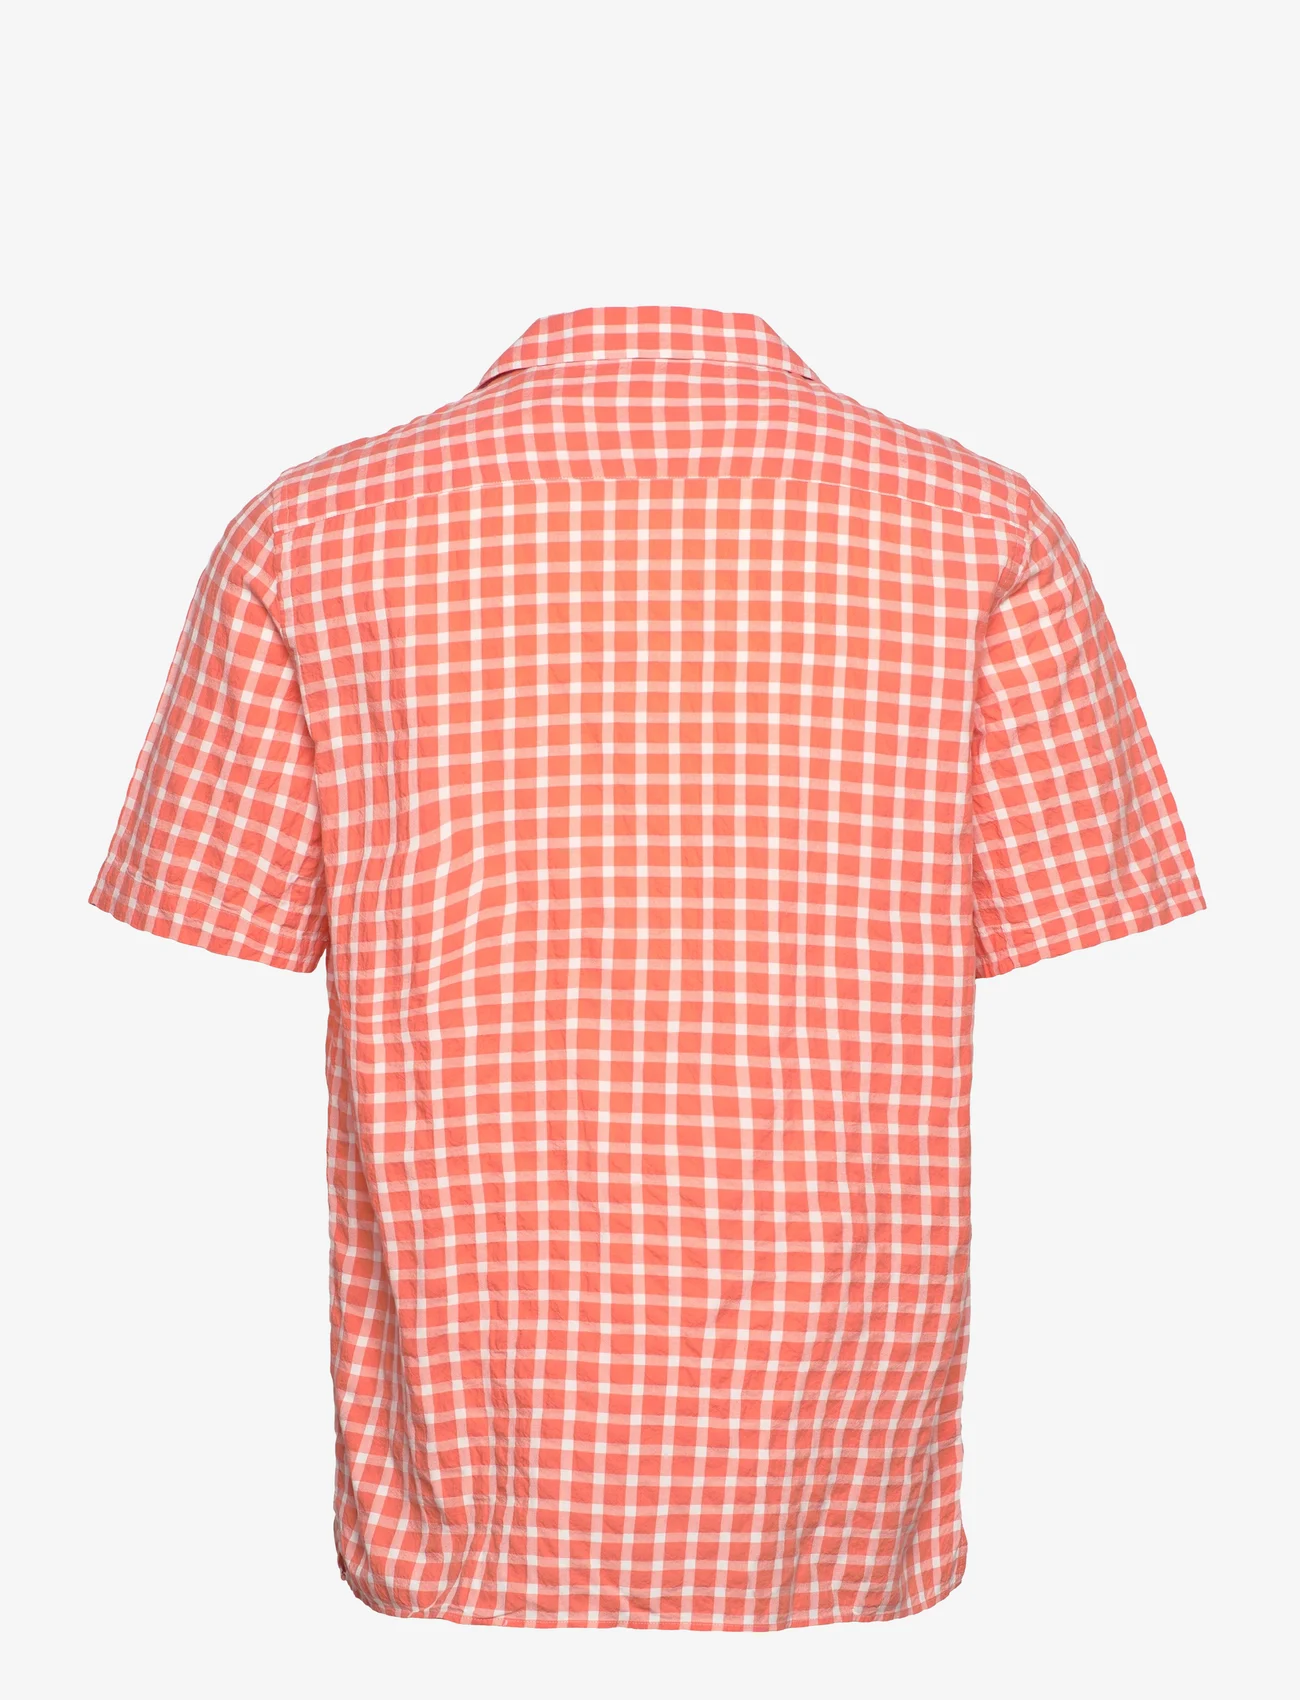 Armor Lux - Checked short-sleeved shirt - checkered shirts - carreaux coral - 1